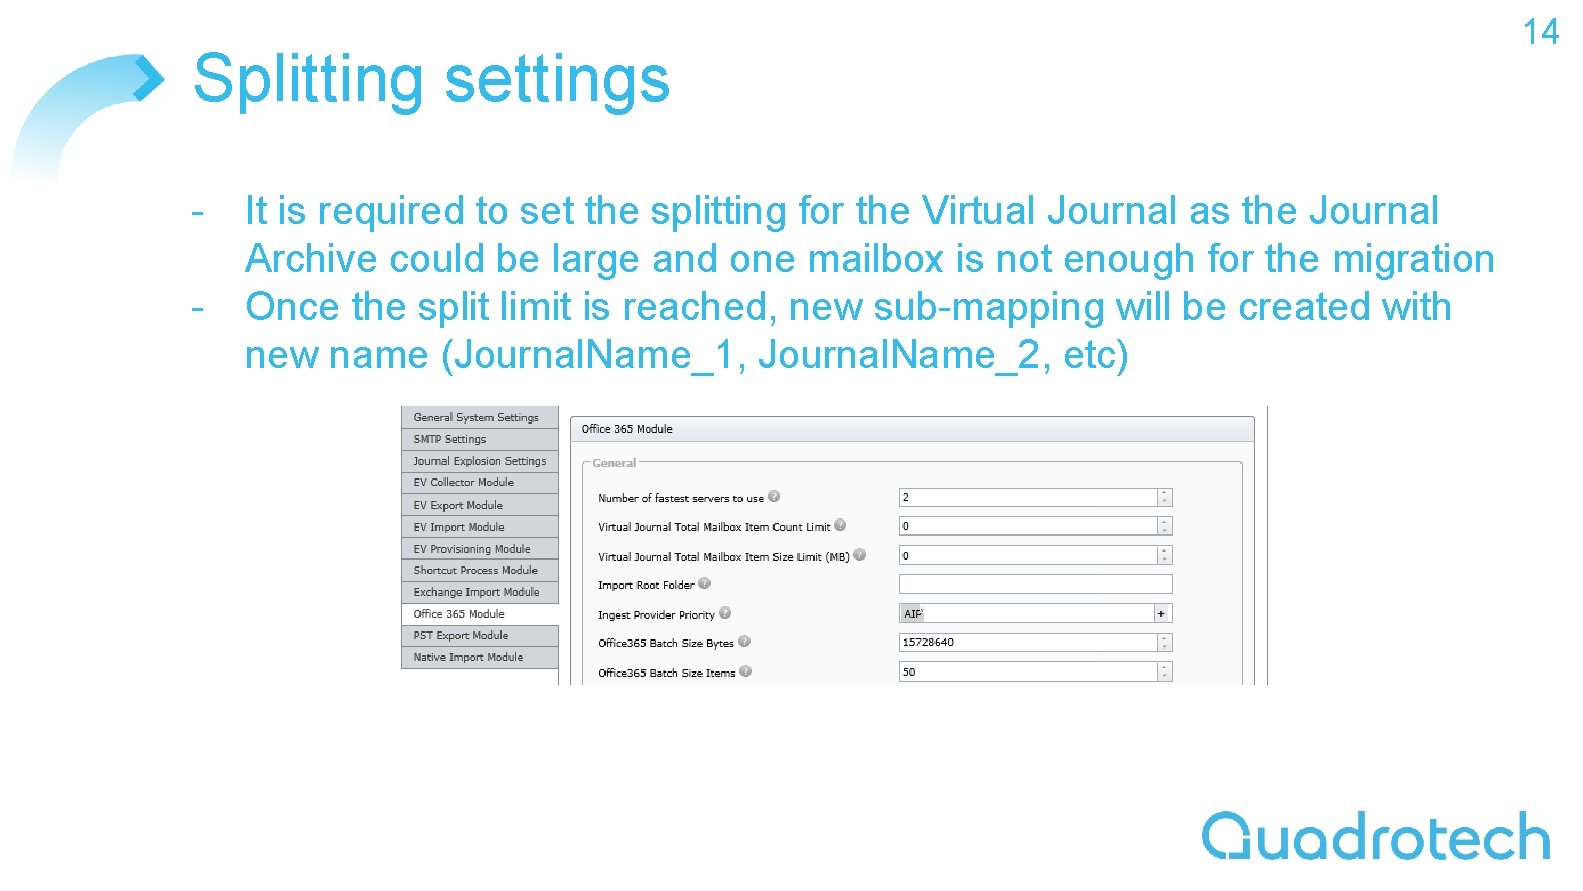 Splitting settings - It is required to set the splitting for the Virtual Journal